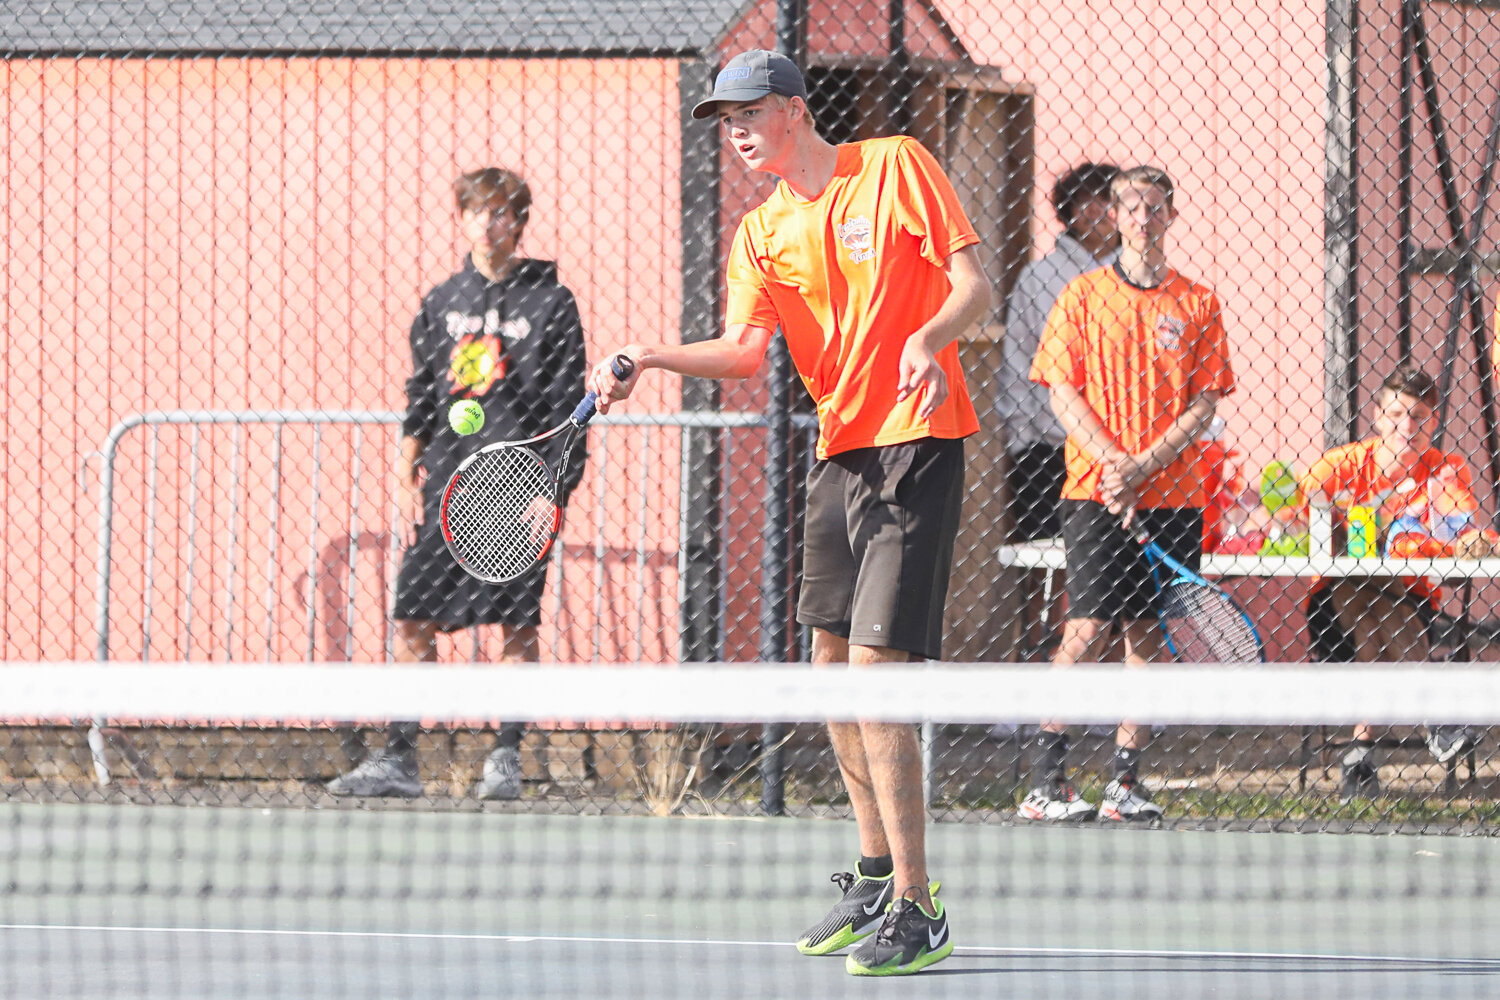 Centralia's Jacoby Corwin hits a forehand during the Tigers' match against Tumwater on Sept. 20.